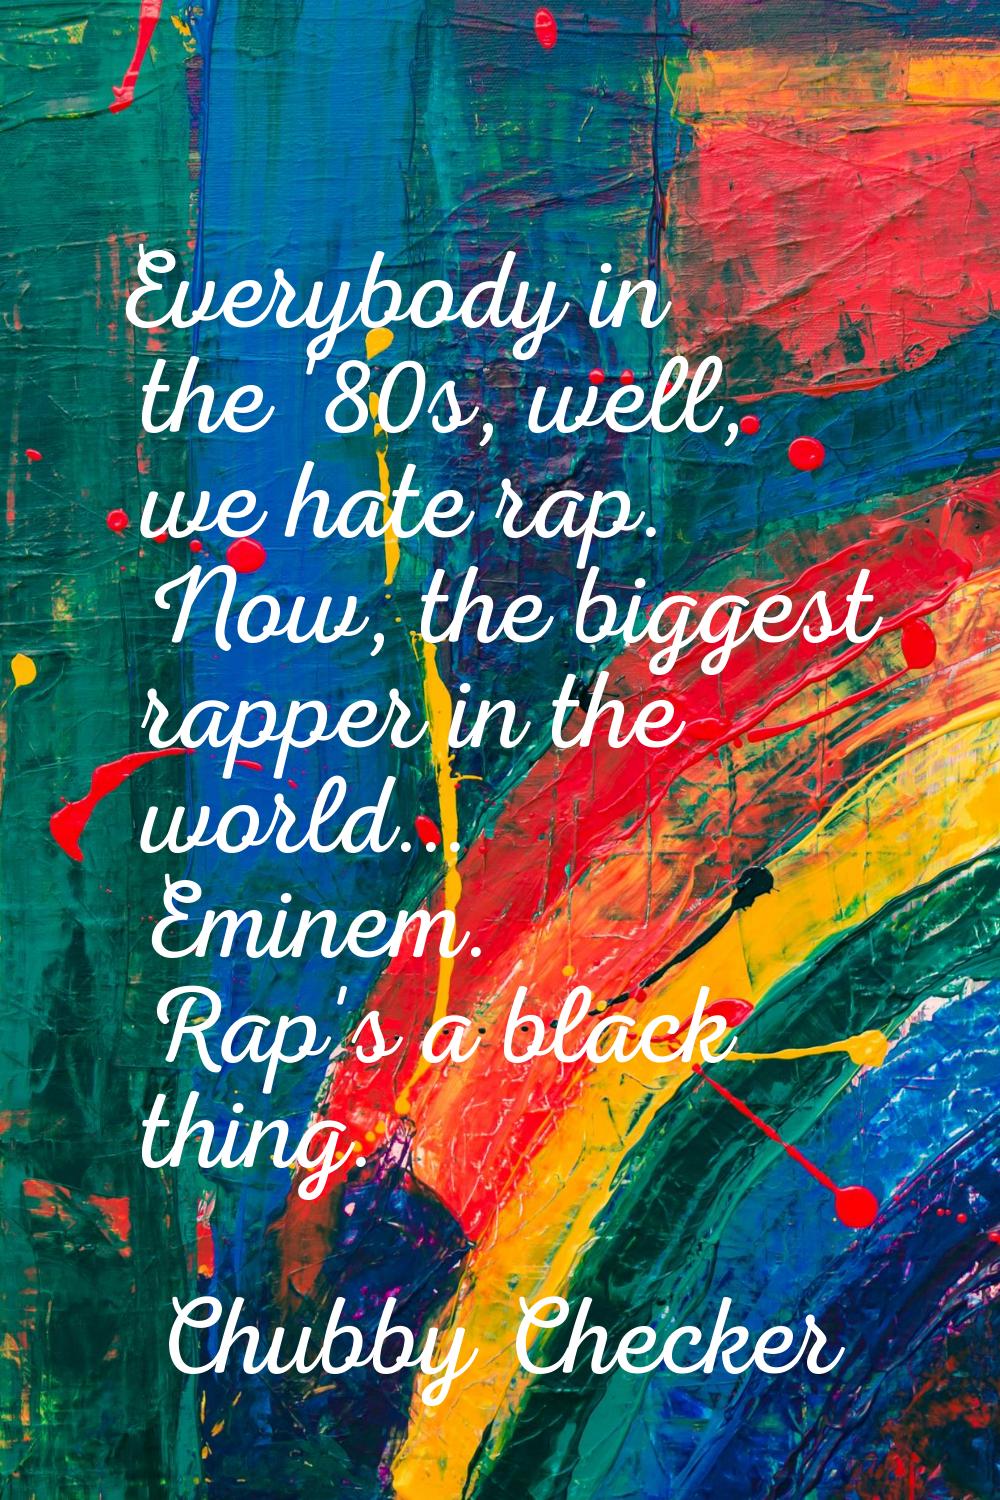 Everybody in the '80s, well, we hate rap. Now, the biggest rapper in the world... Eminem. Rap's a b